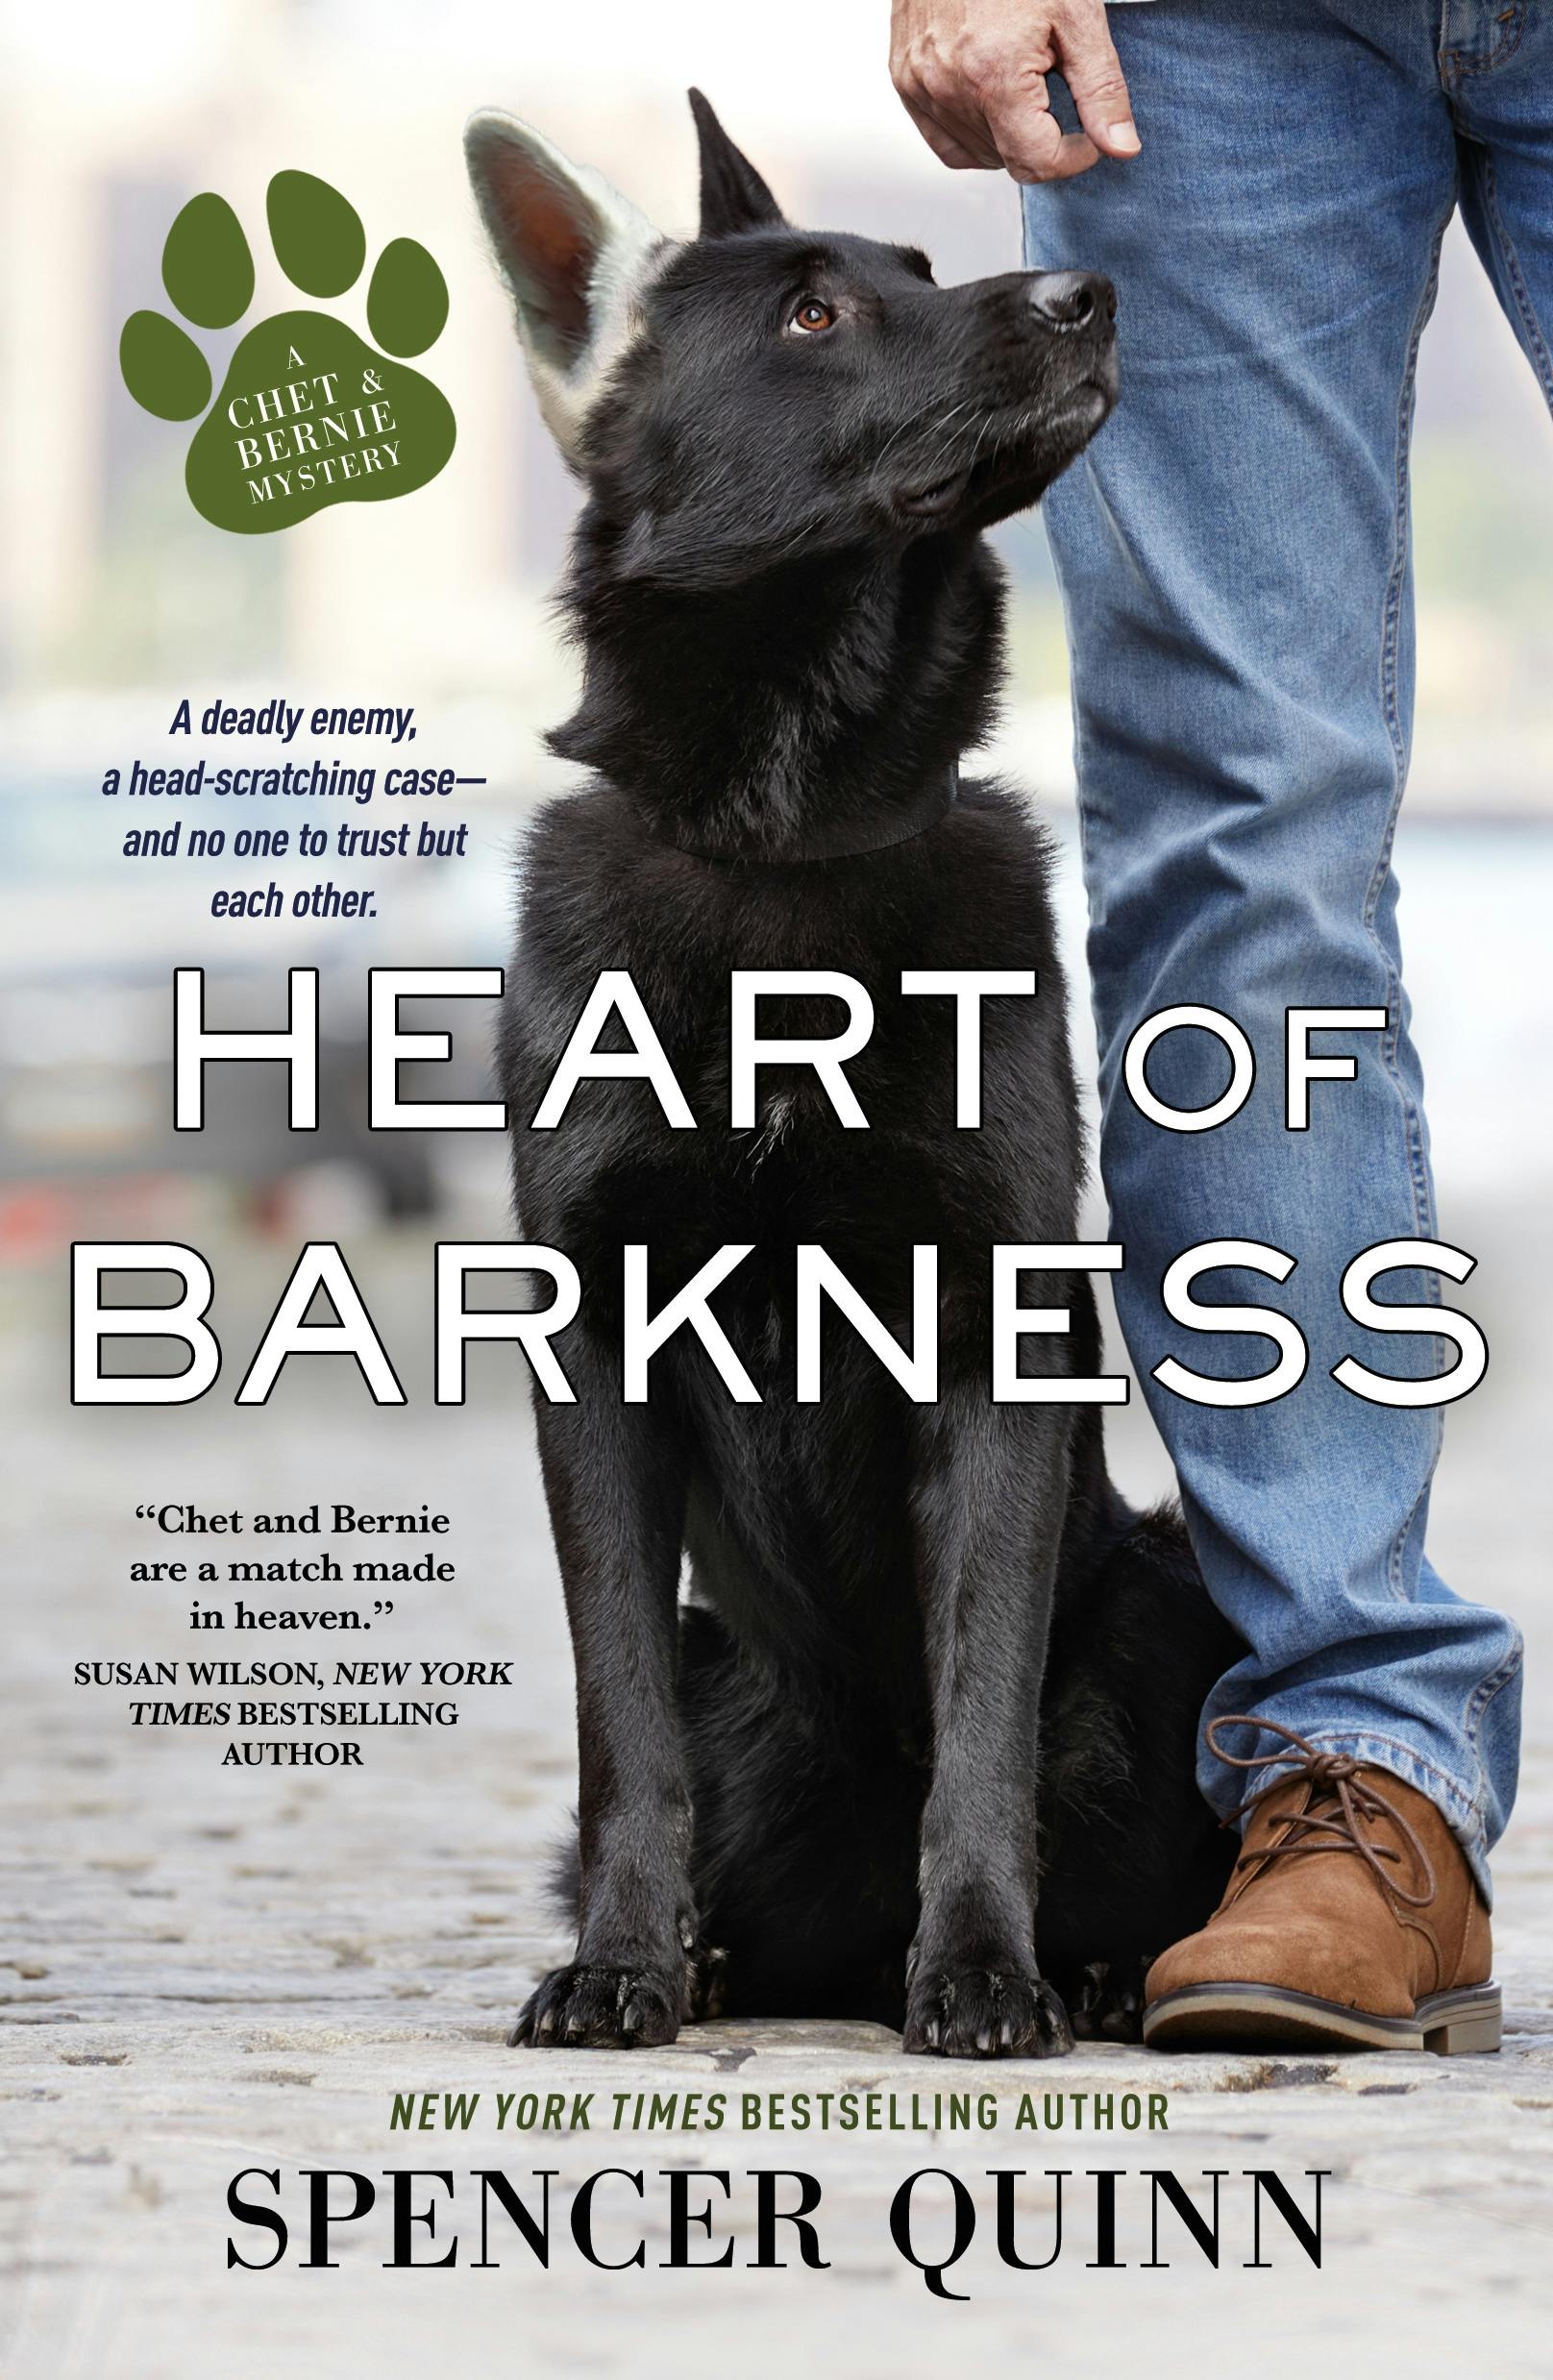 Cover for the book titled as: Heart of Barkness